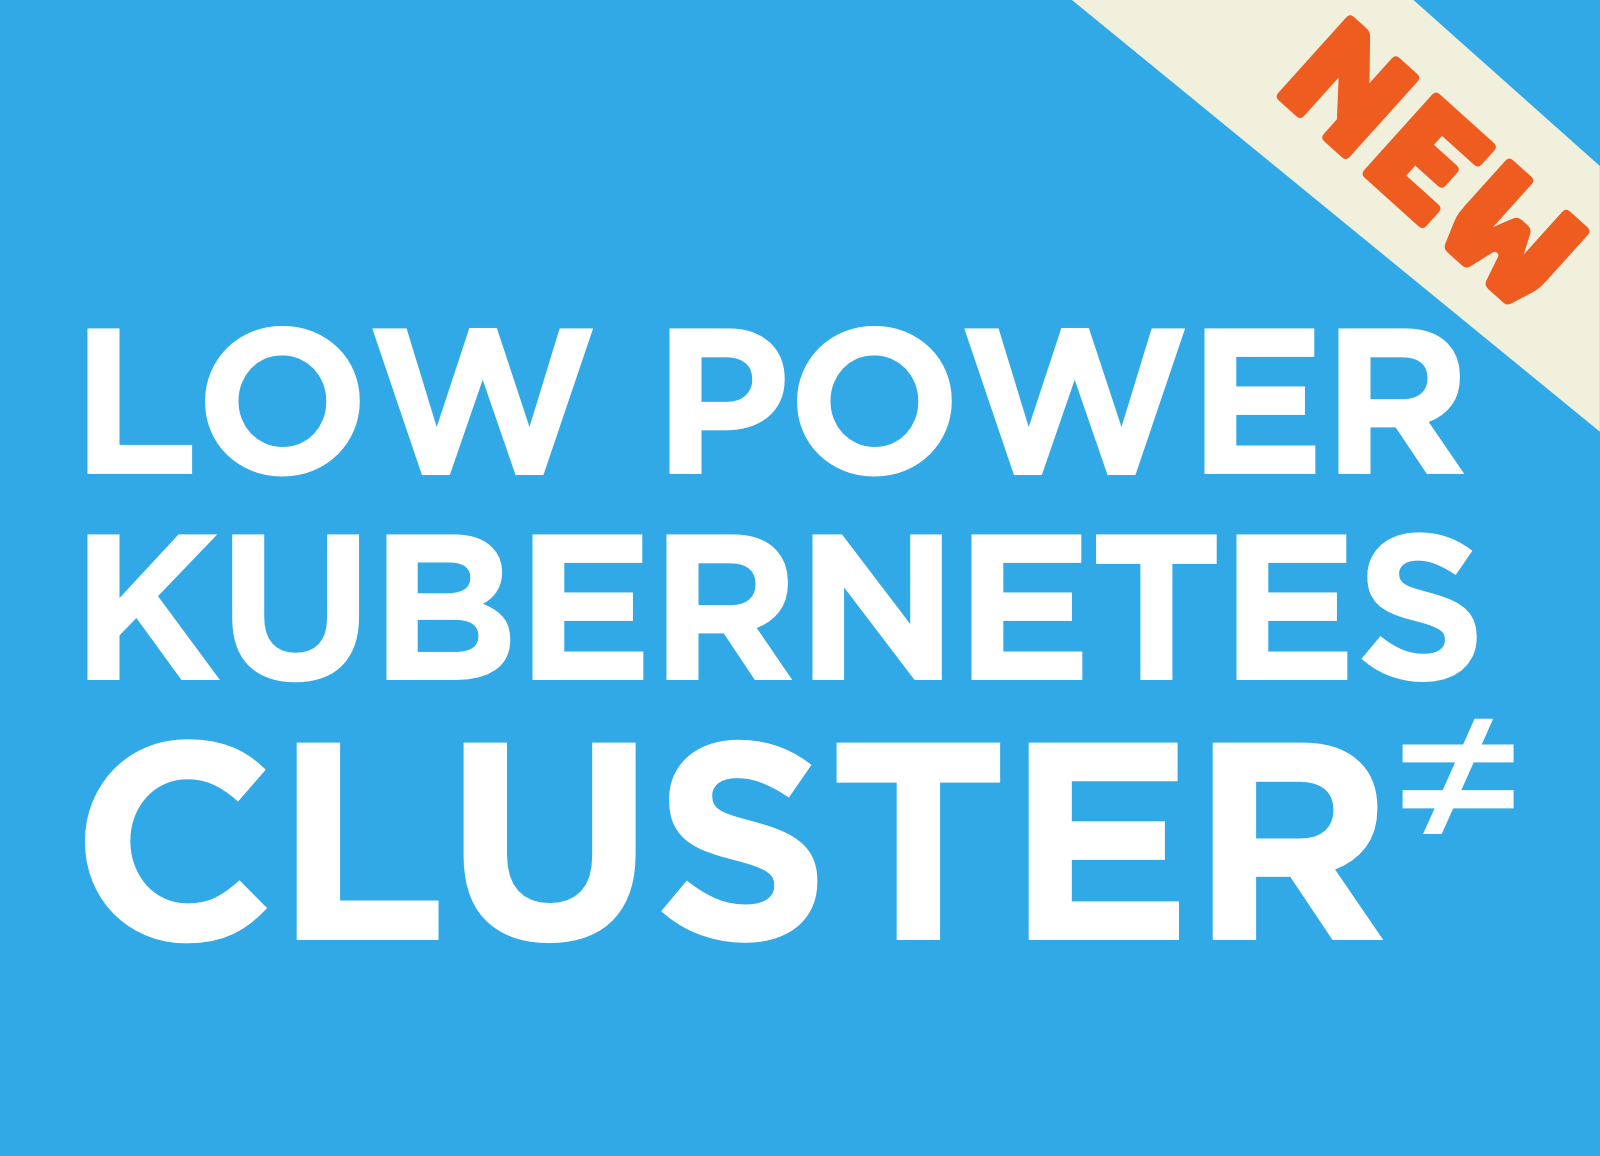 Kubernetes Cluster - Low Power